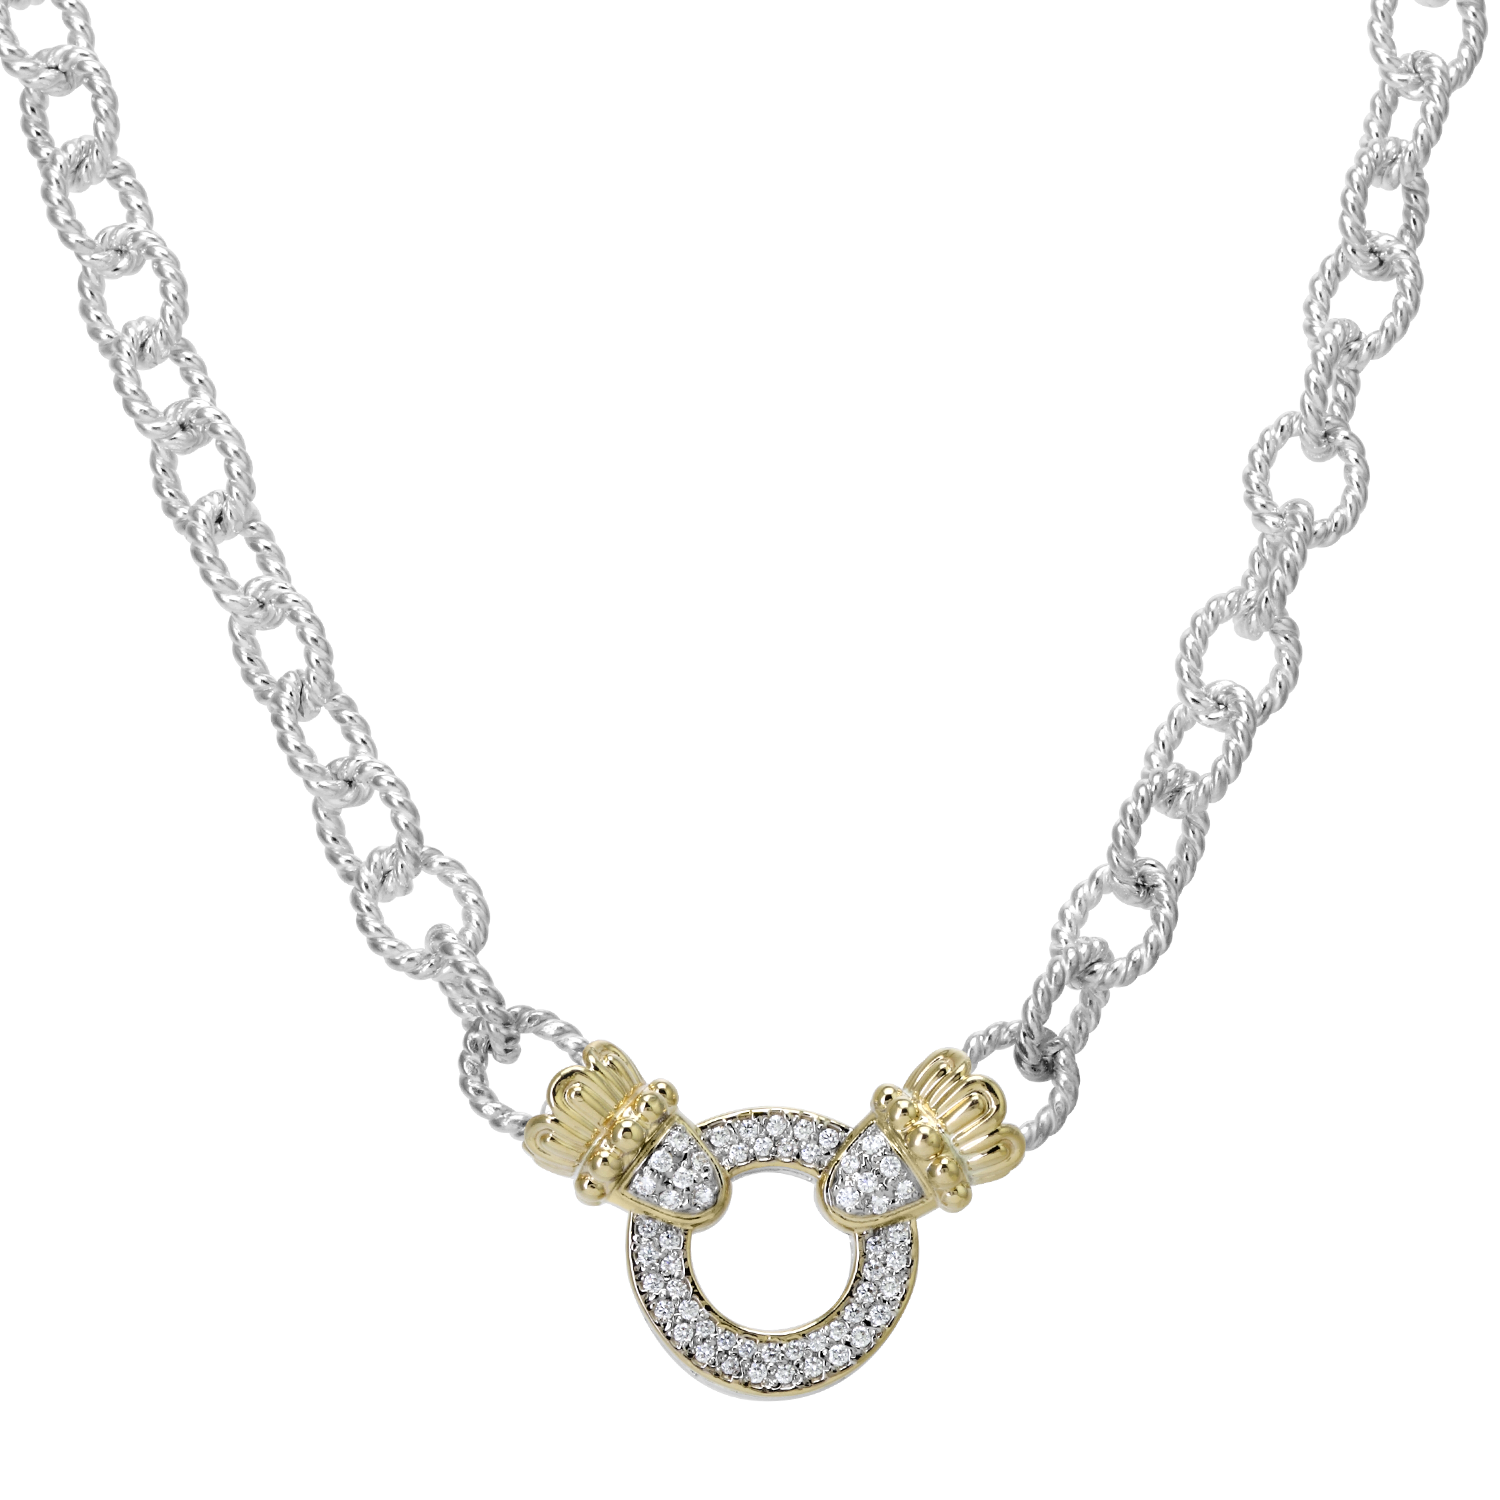 Vahan Le Cercle Sterling Silver & Yellow Gold Diamond Necklace Galloway and Moseley, Inc. Sumter, SC